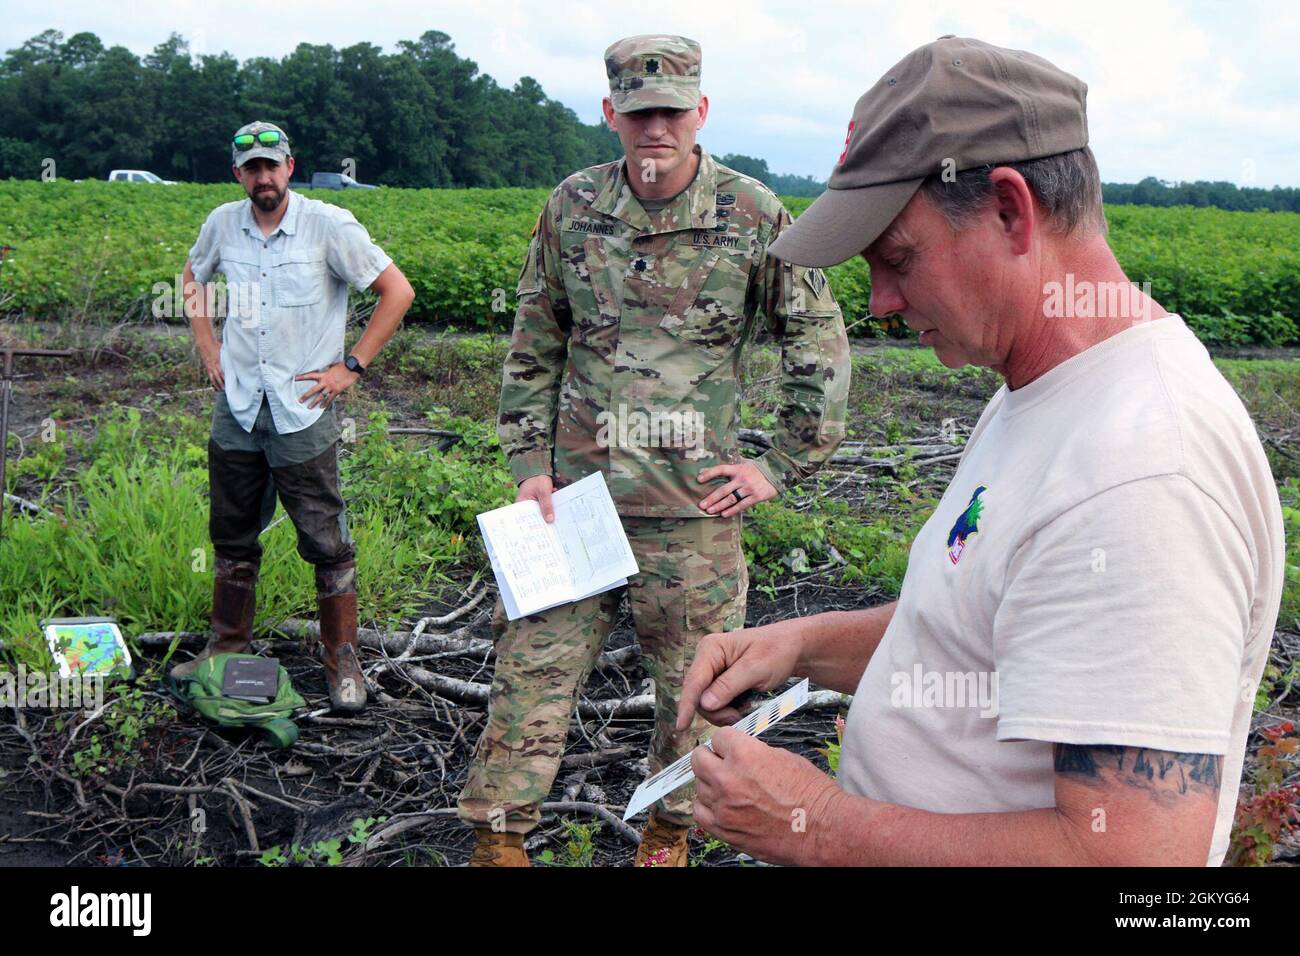 Richard Darden (right), the Regulatory Project Manager for the U.S. Army Corps Of Engineers, Charleston District, explains to Lt. Col. Andrew Johannes and other staff members, how to analyze soil samples during a field visit in Orangeburg, S.C.  Johannes took command of the district in July and was taking part in delineation training, designed to better educate new members of the district to what regulators do for their job. Stock Photo